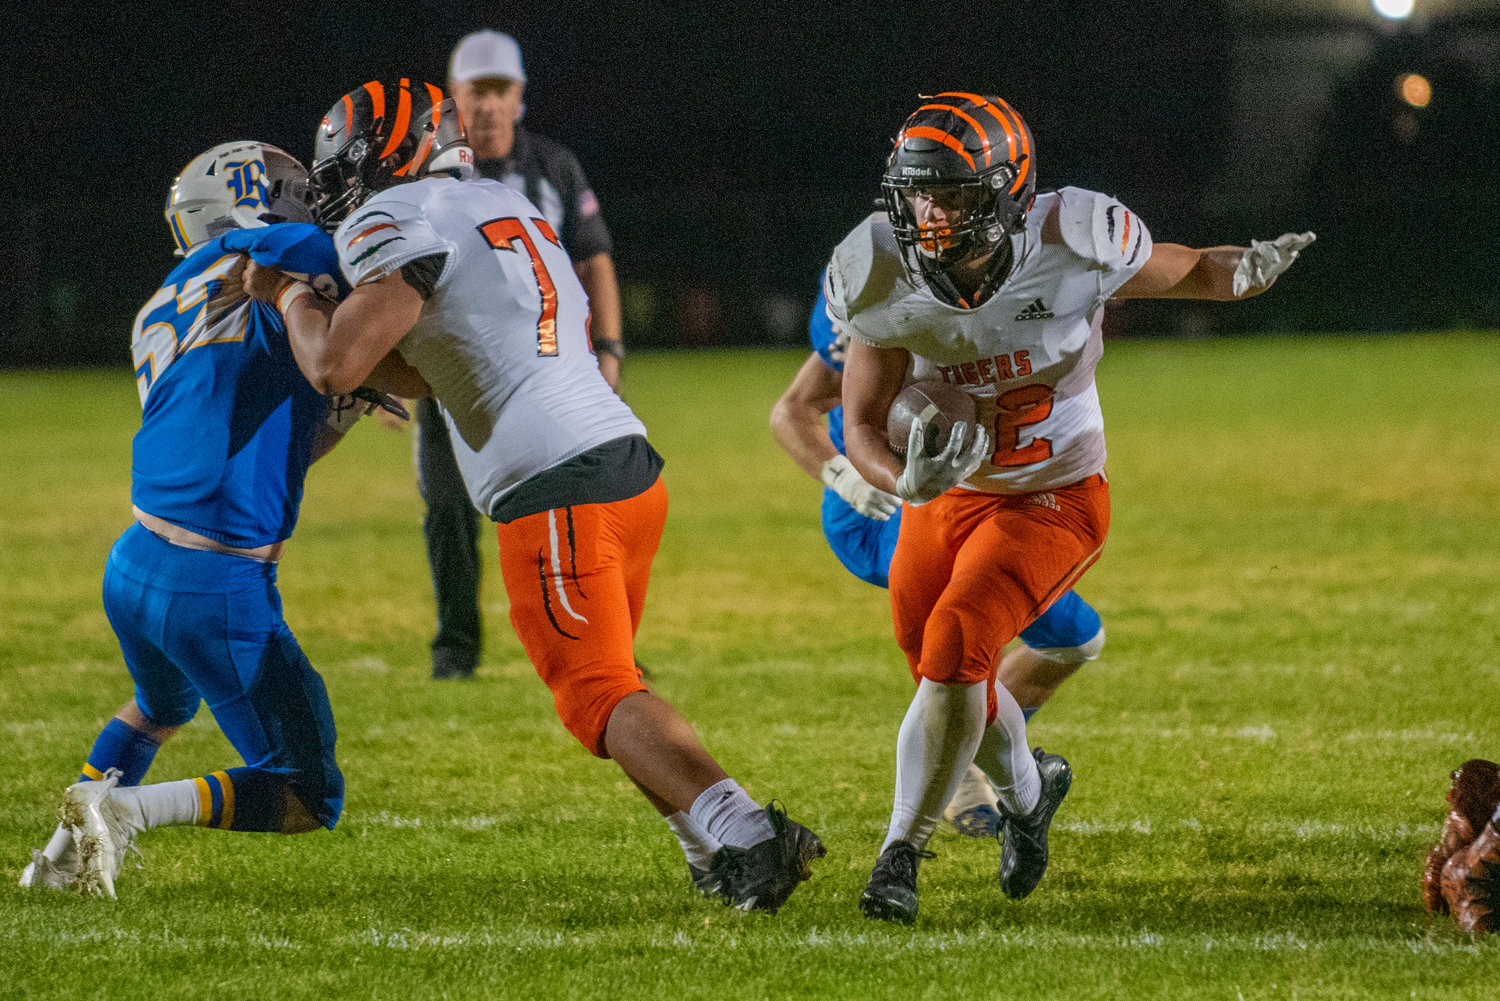 Centralia’s Gabe Seymour (32) finds running room against Rochester on Oct. 2, 2021.